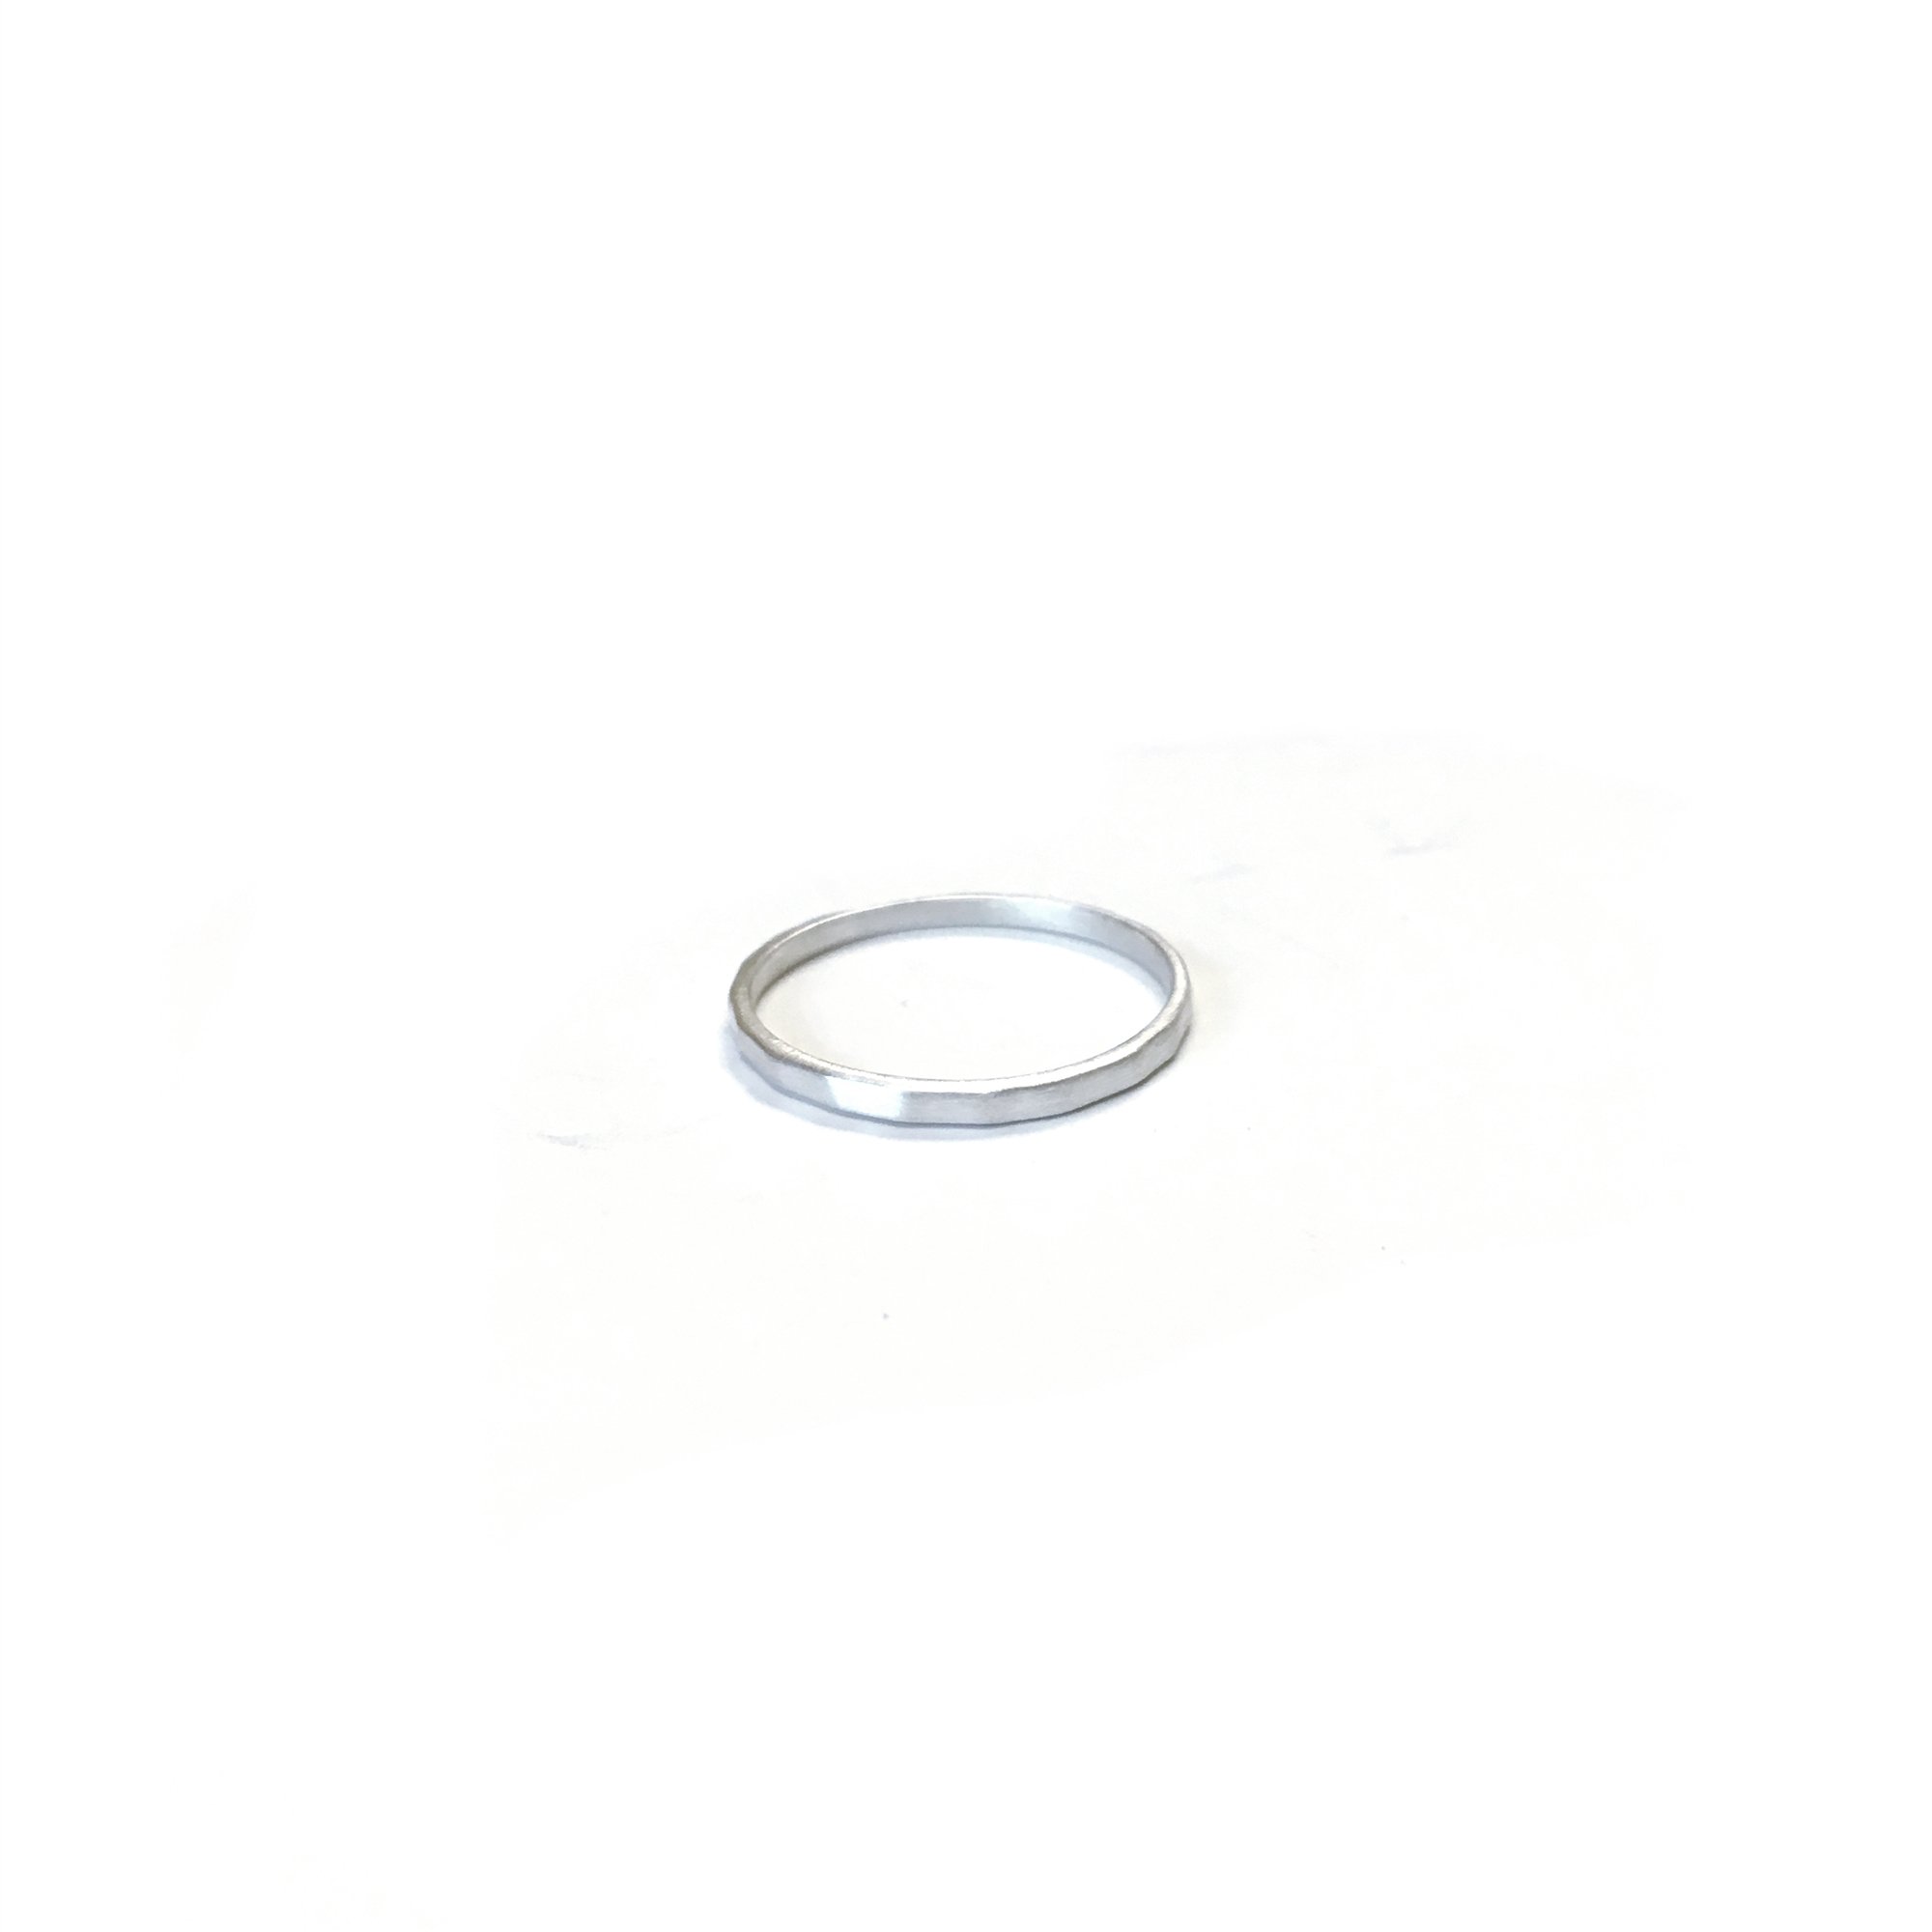 HAMMERED STERLING SILVER STACKABLE RINGS - SIZE 7-Jewelry-Jack and Jill Boutique